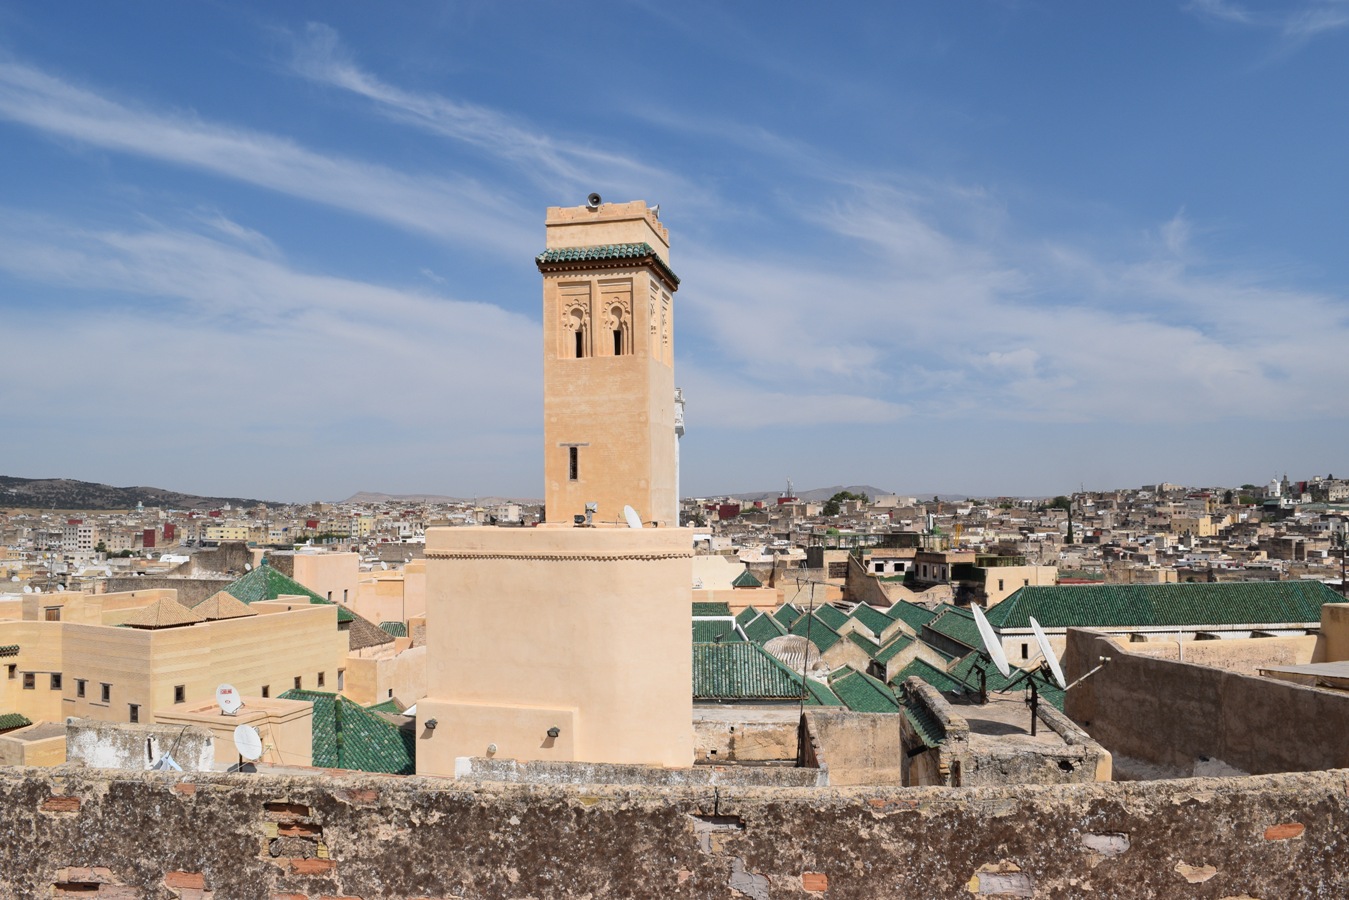 Tips for visiting Fez, Morocco | The Cheerful Wanderer